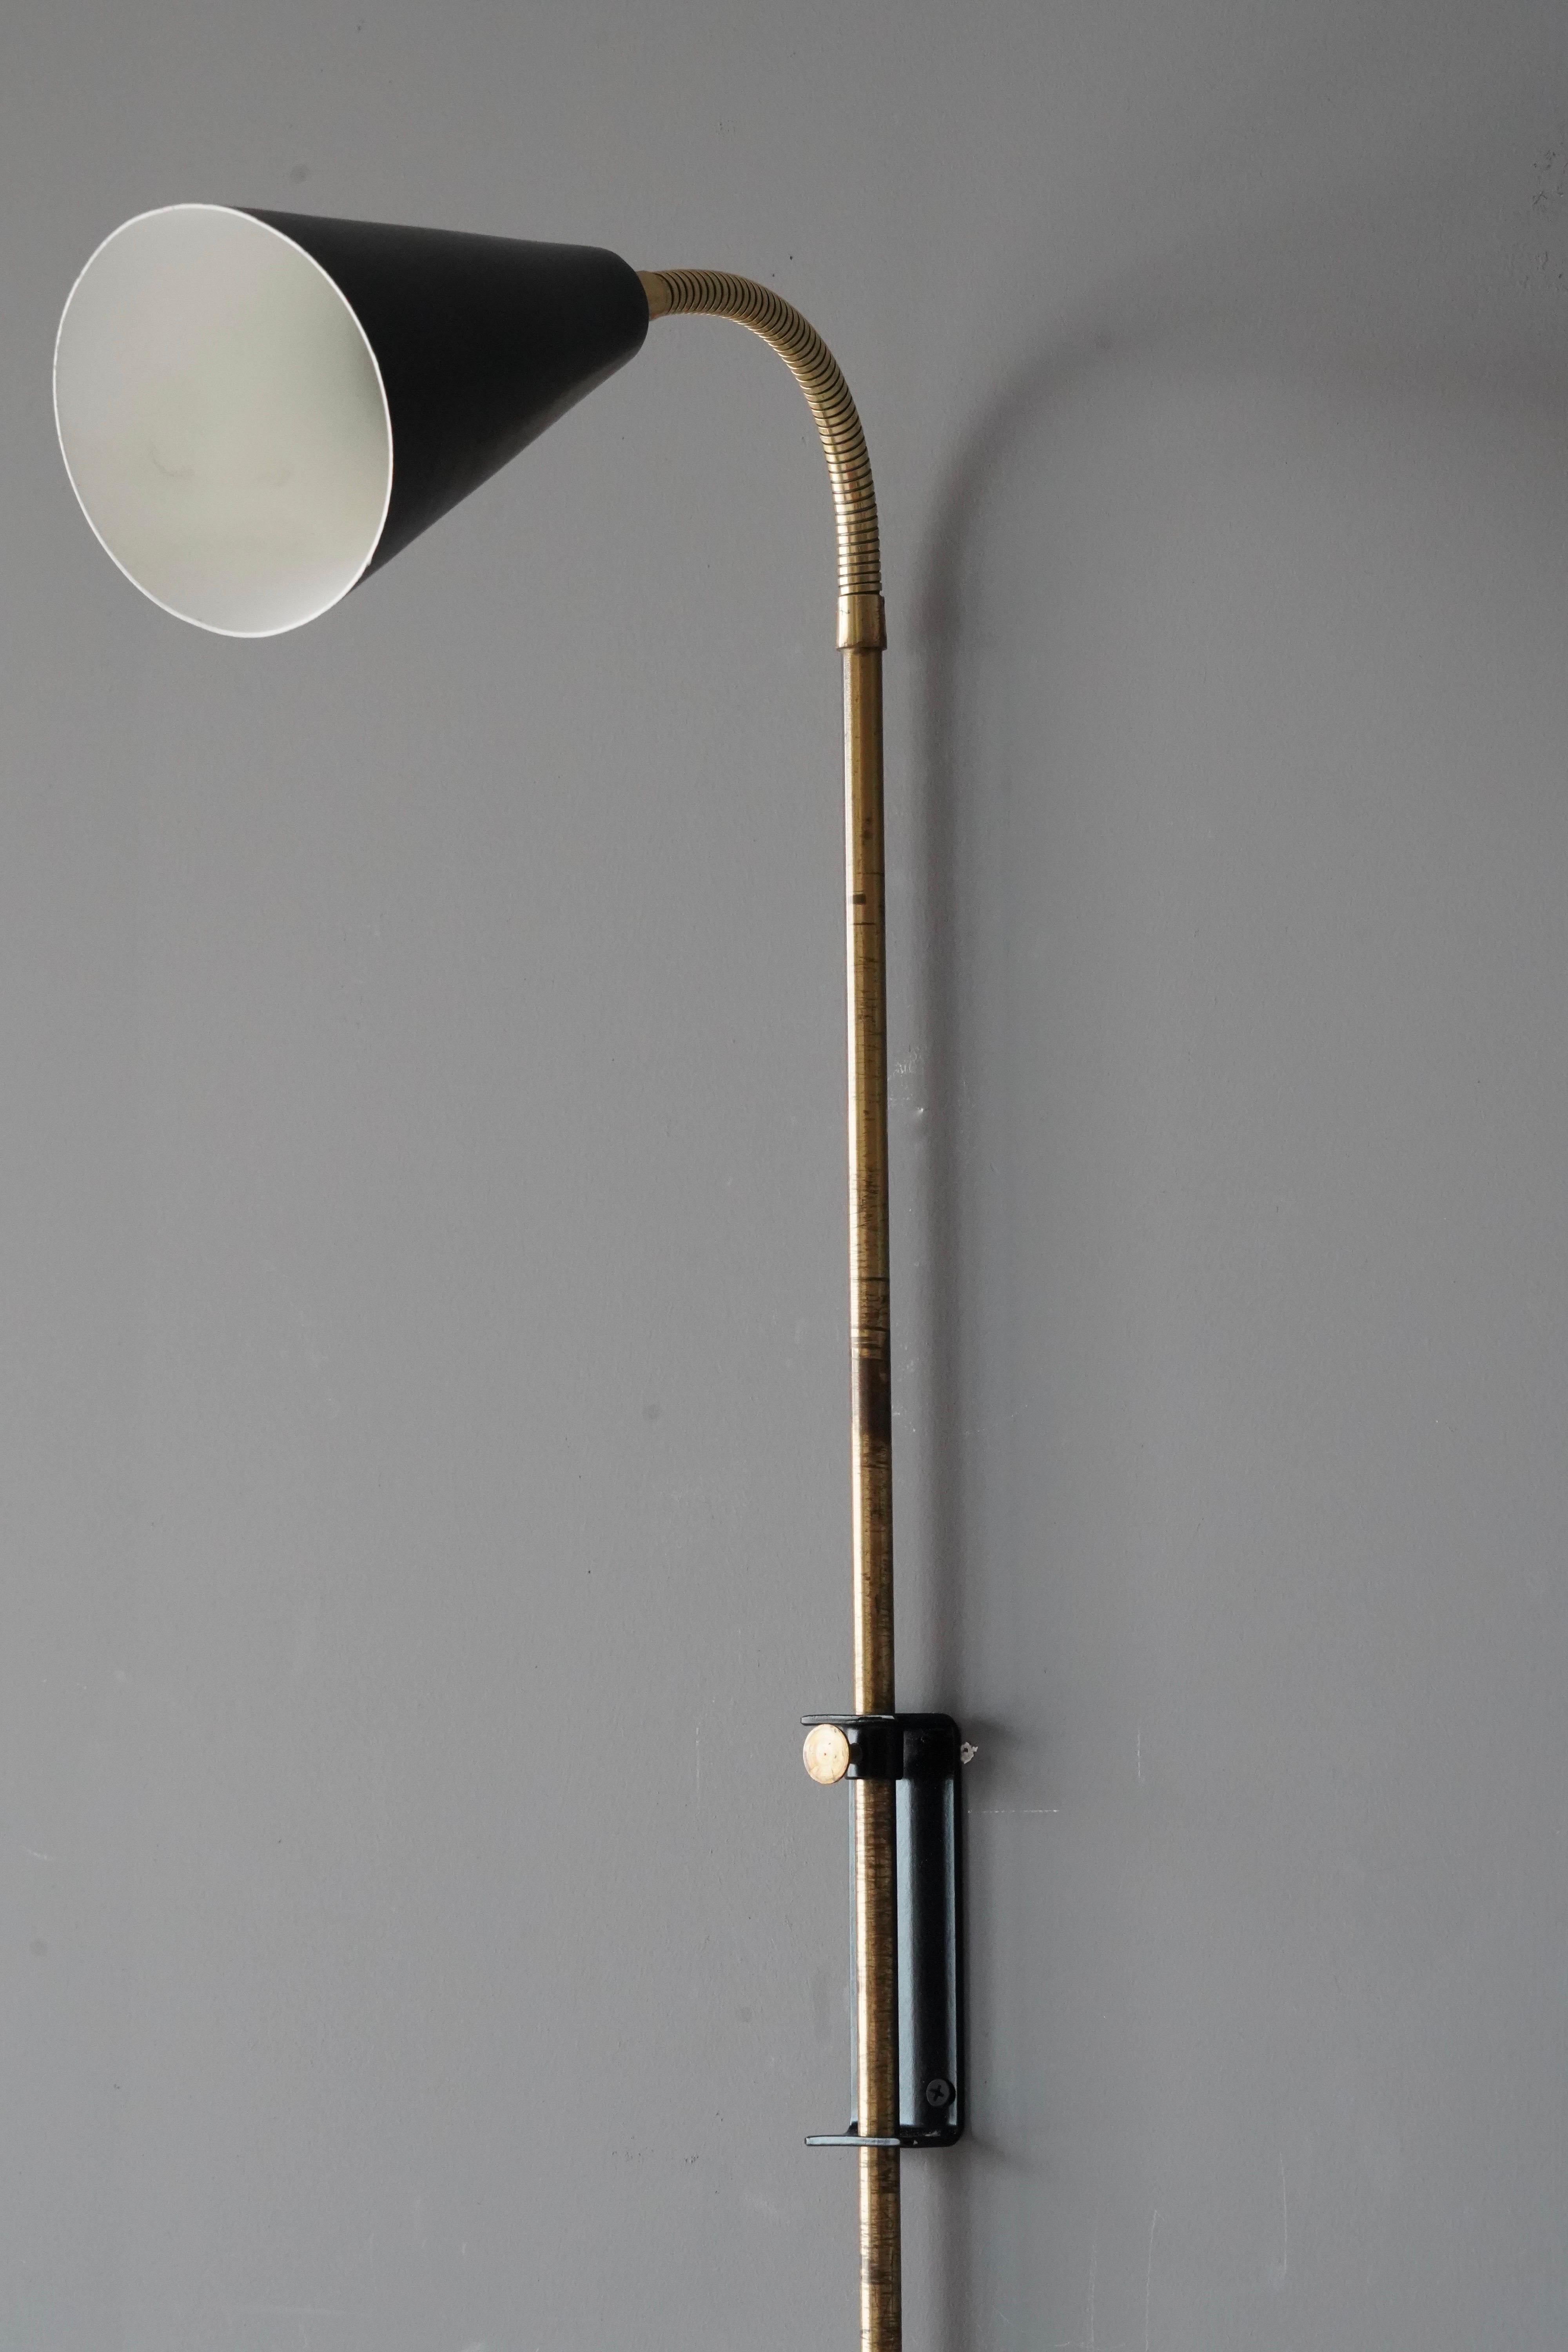 Mid-20th Century Swedish Adjustable Wall Light Task Light Black Lacquer Metal Brass Sweden 1950s For Sale